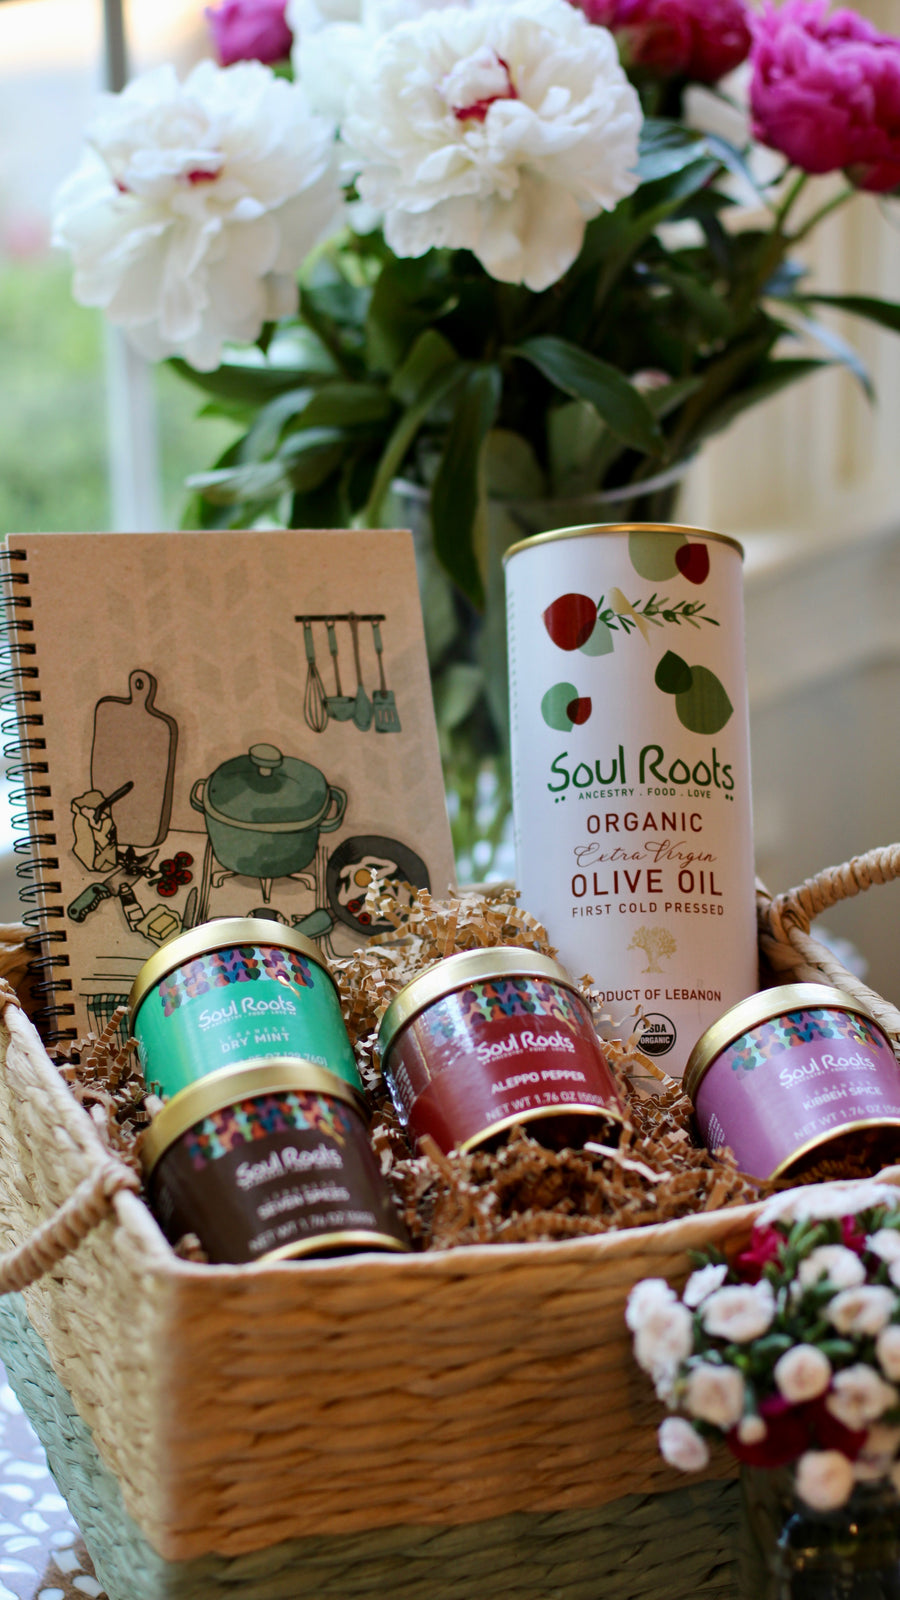 Soul Roots Mother's Day Basket